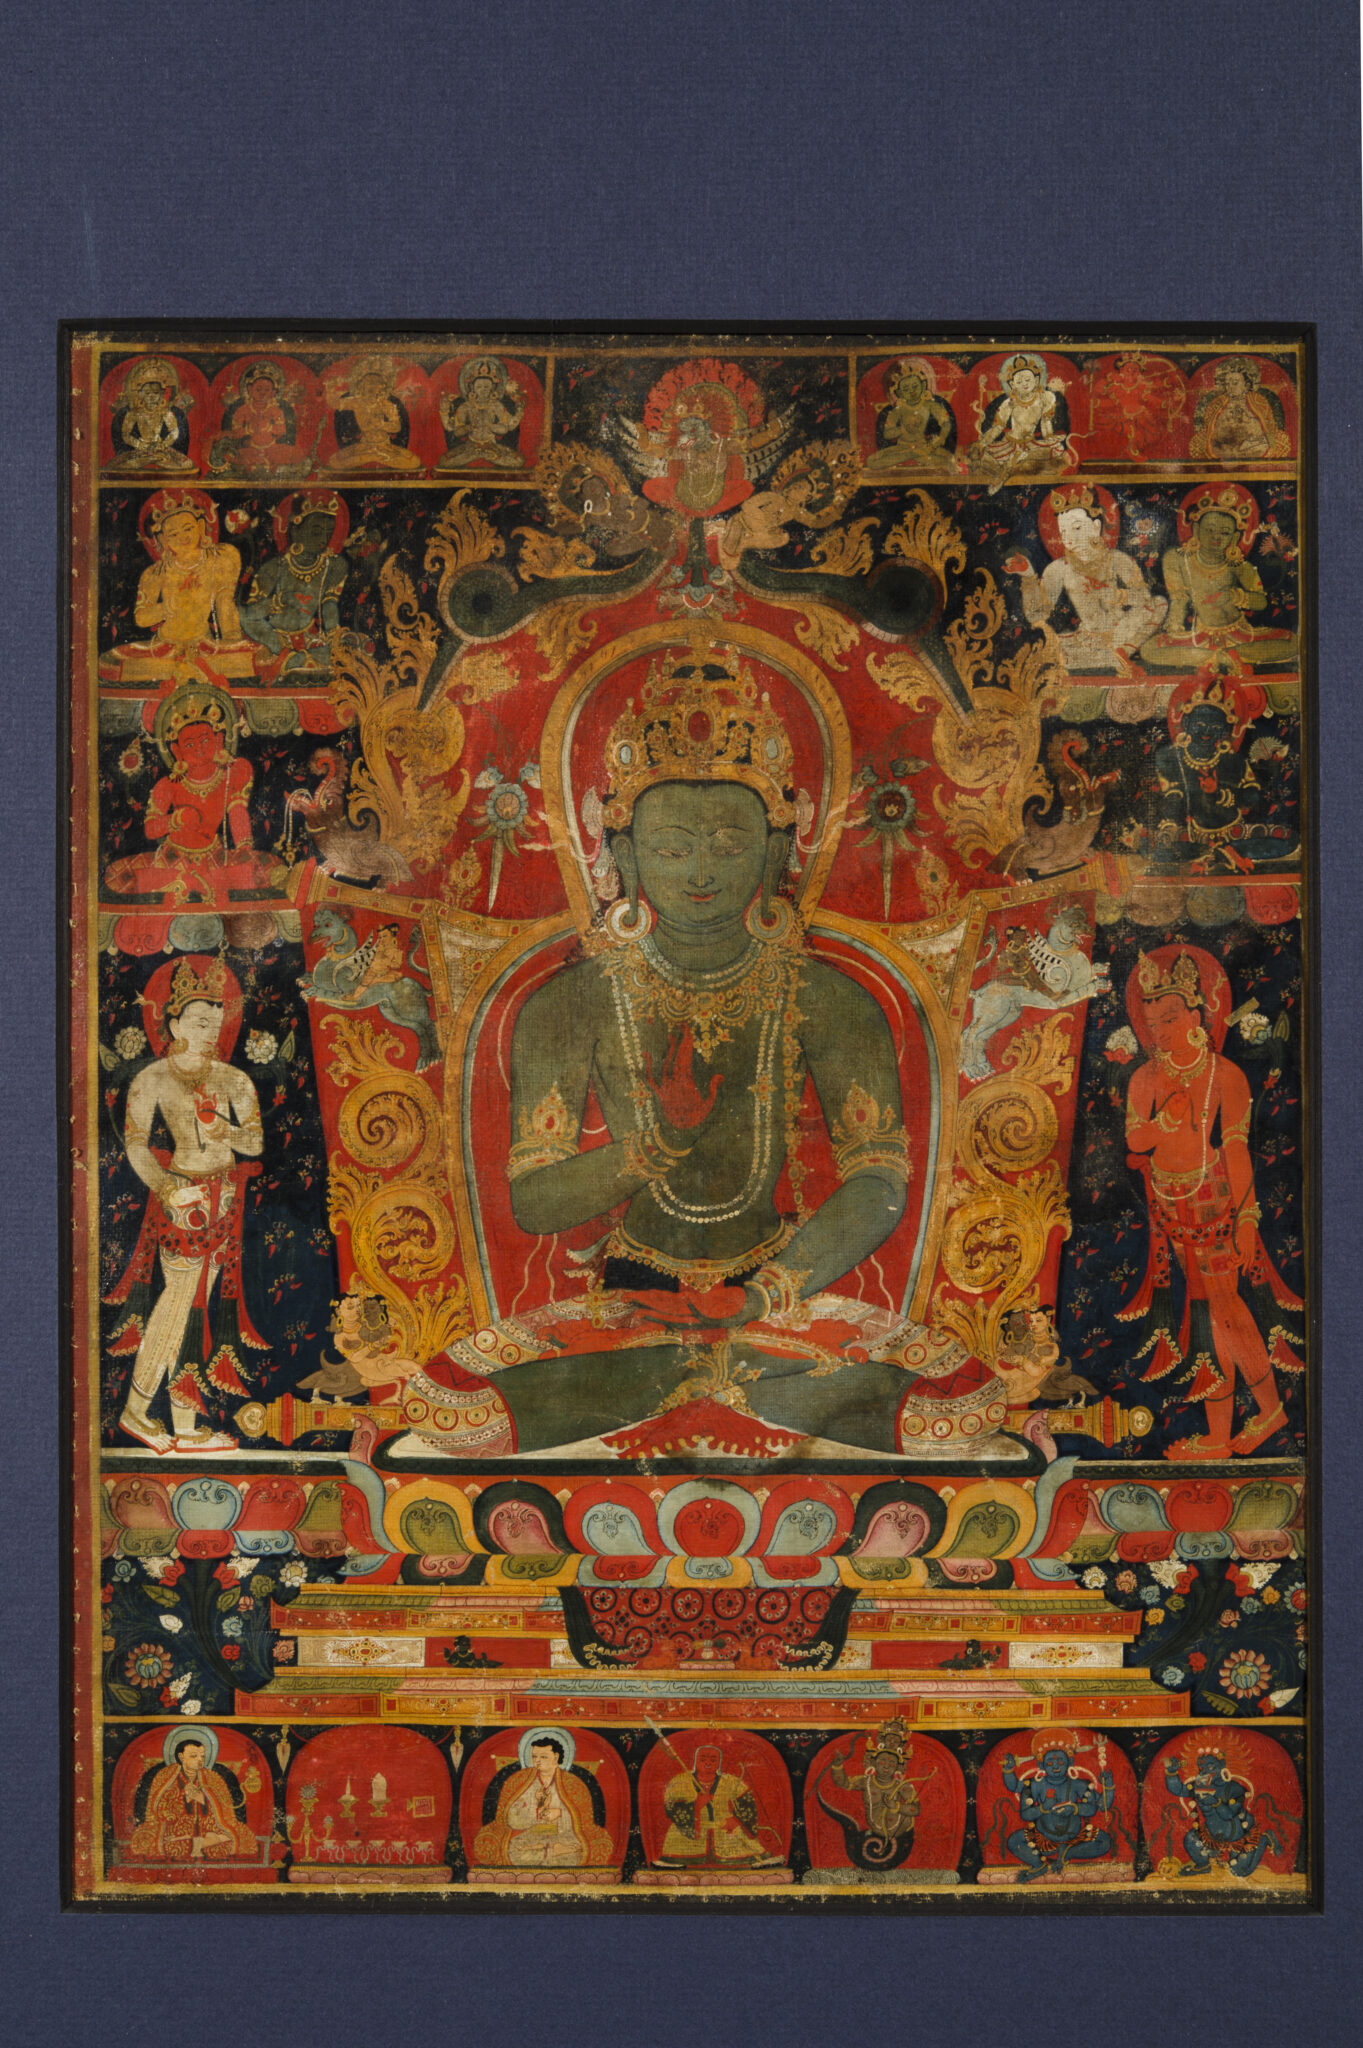 Green-skinned Buddha seated on throne, surrounded by attendants and deities arranged in registers